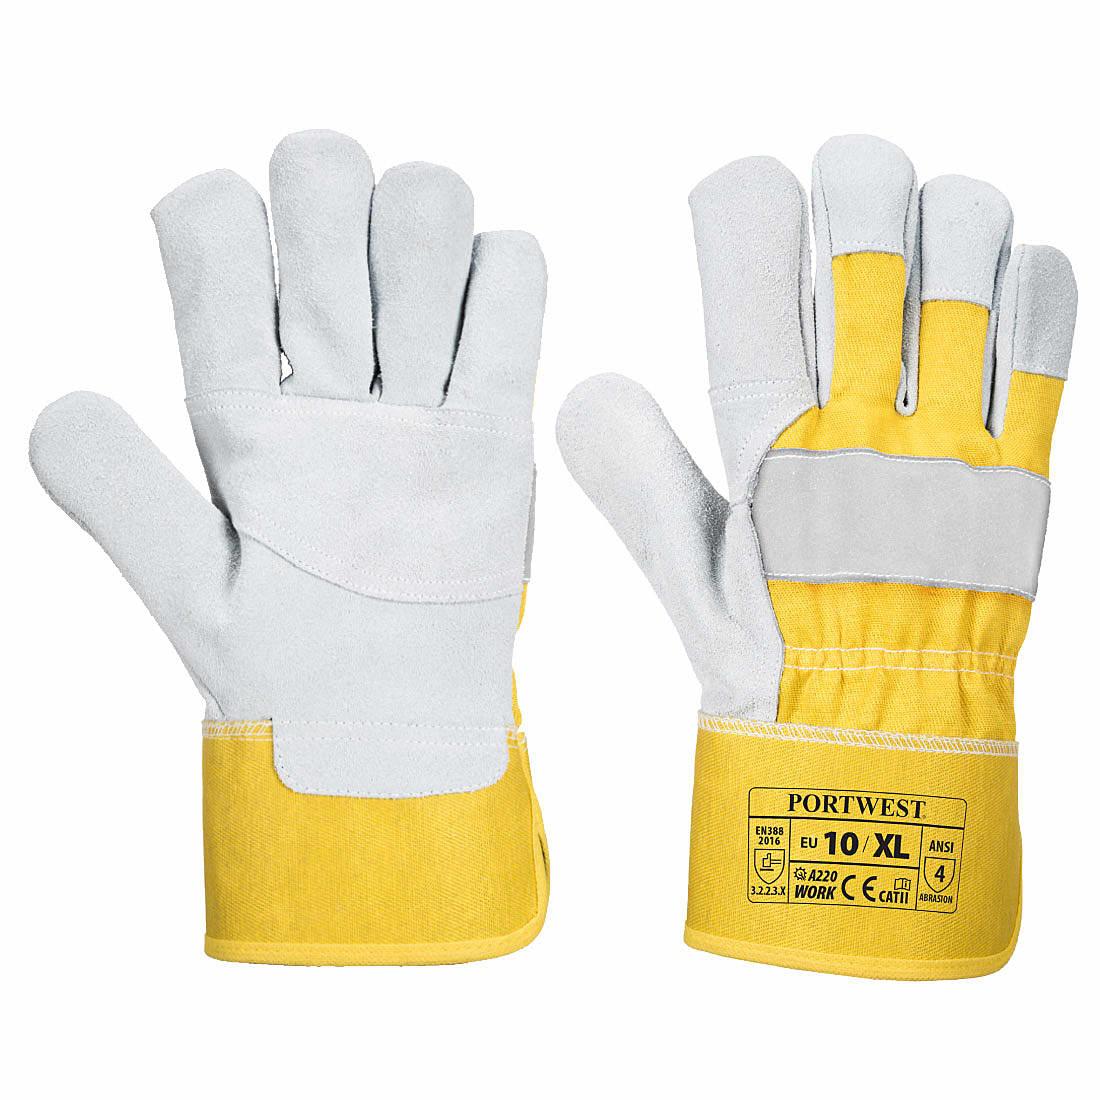 Portwest Premium Chrome Rigger Gloves in Yellow (Product Code: A220)